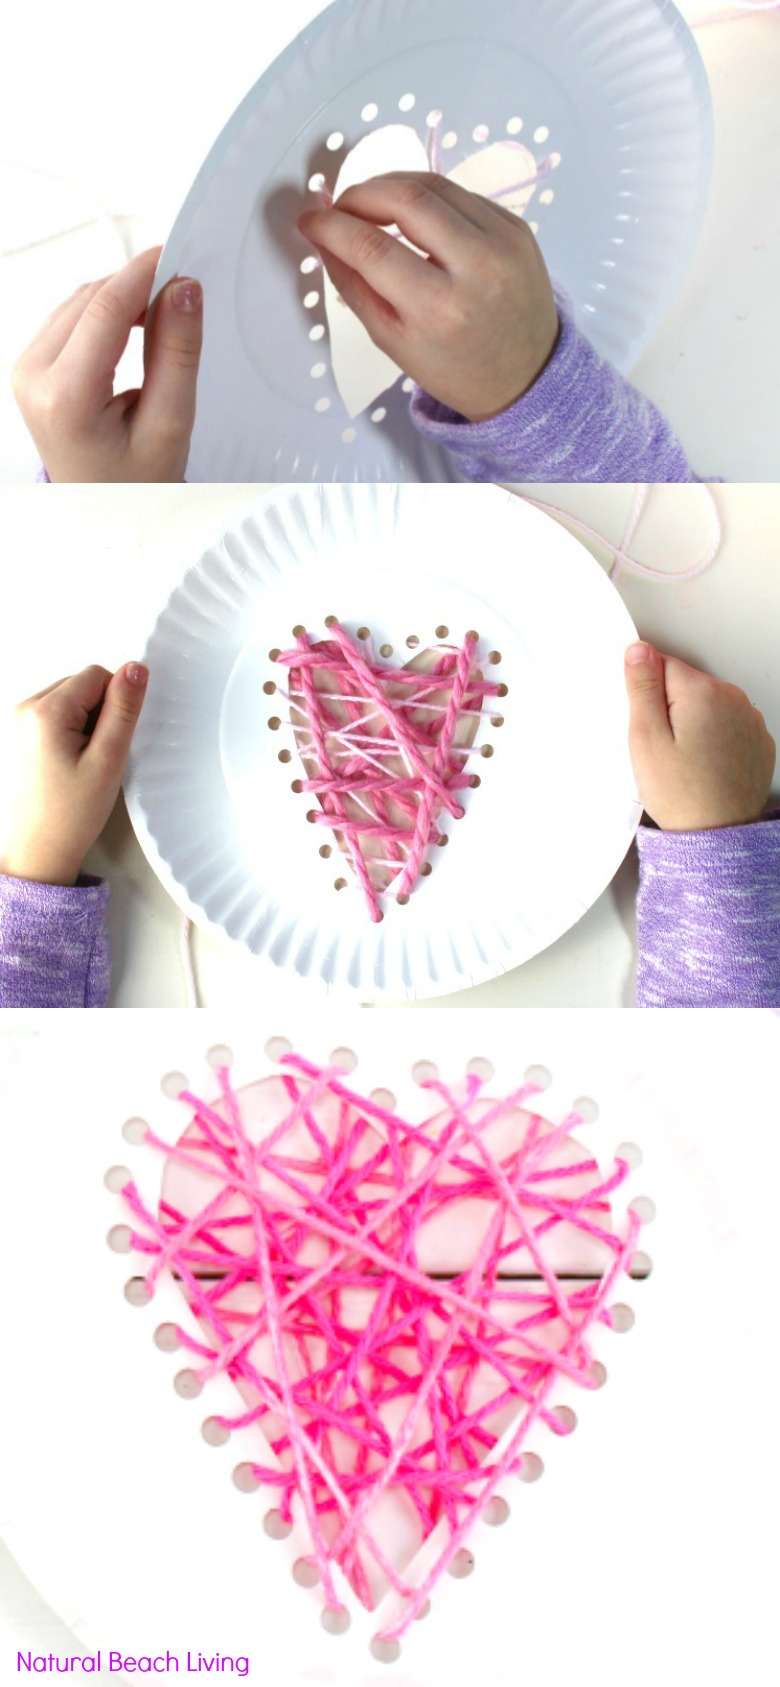 25 Valentine Crafts for Preschoolers, Kids Valentines Ideas and Activities, Kids love to do arts and crafts for Valentines day, Whether you are looking for heart crafts, love bugs, preschool handprint crafts, shaving cream art or something else, you are sure to find several Valentine ideas your children will enjoy. Valentine Crafts for Preschoolers 